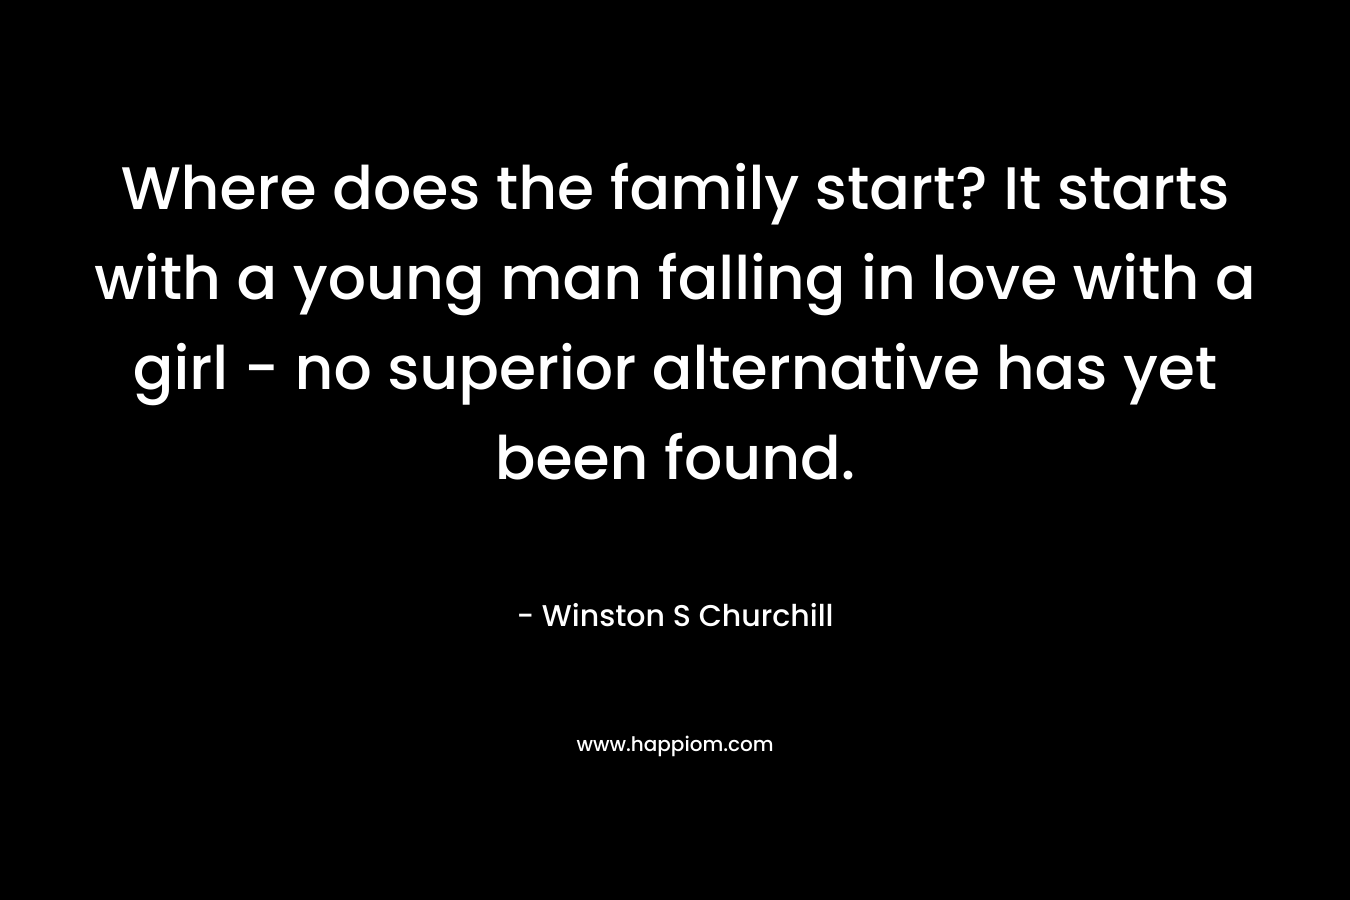 Where does the family start? It starts with a young man falling in love with a girl - no superior alternative has yet been found.